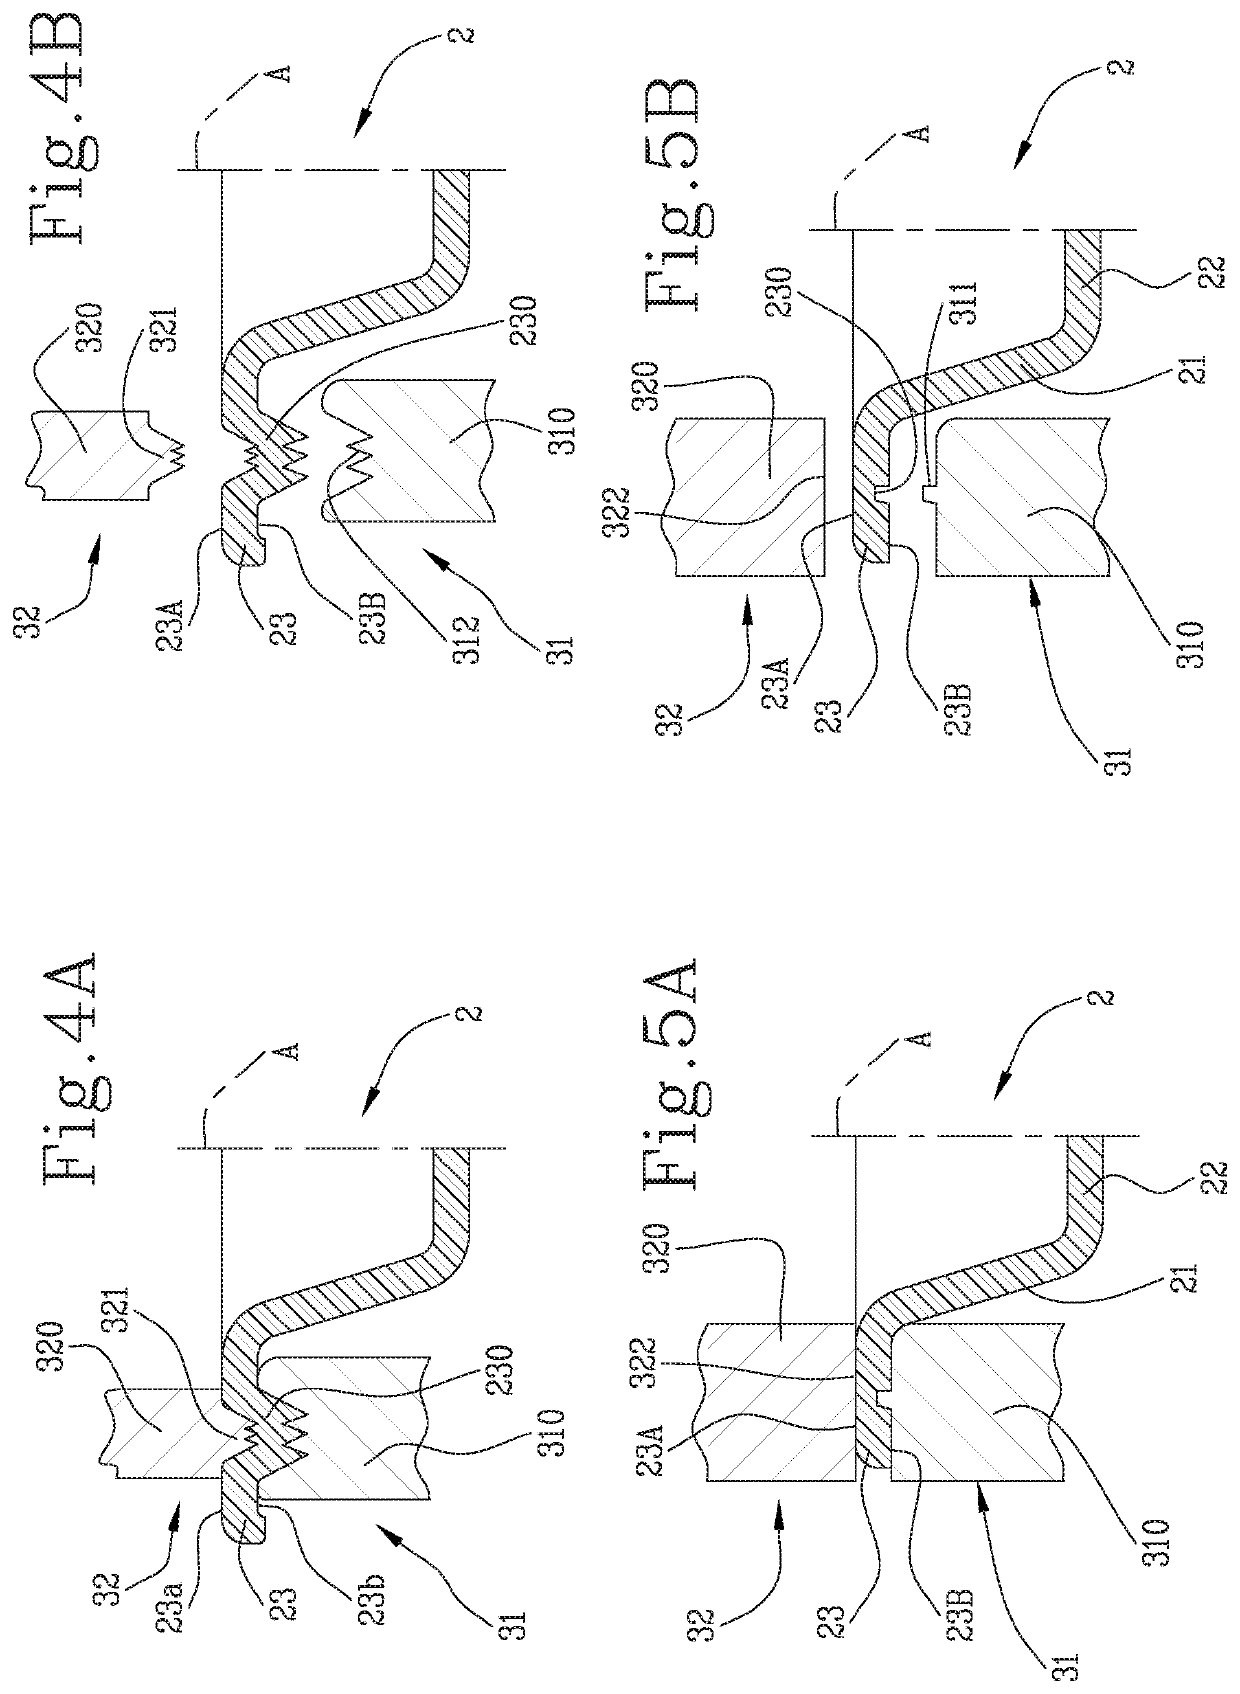 Apparatus and method for processing cups